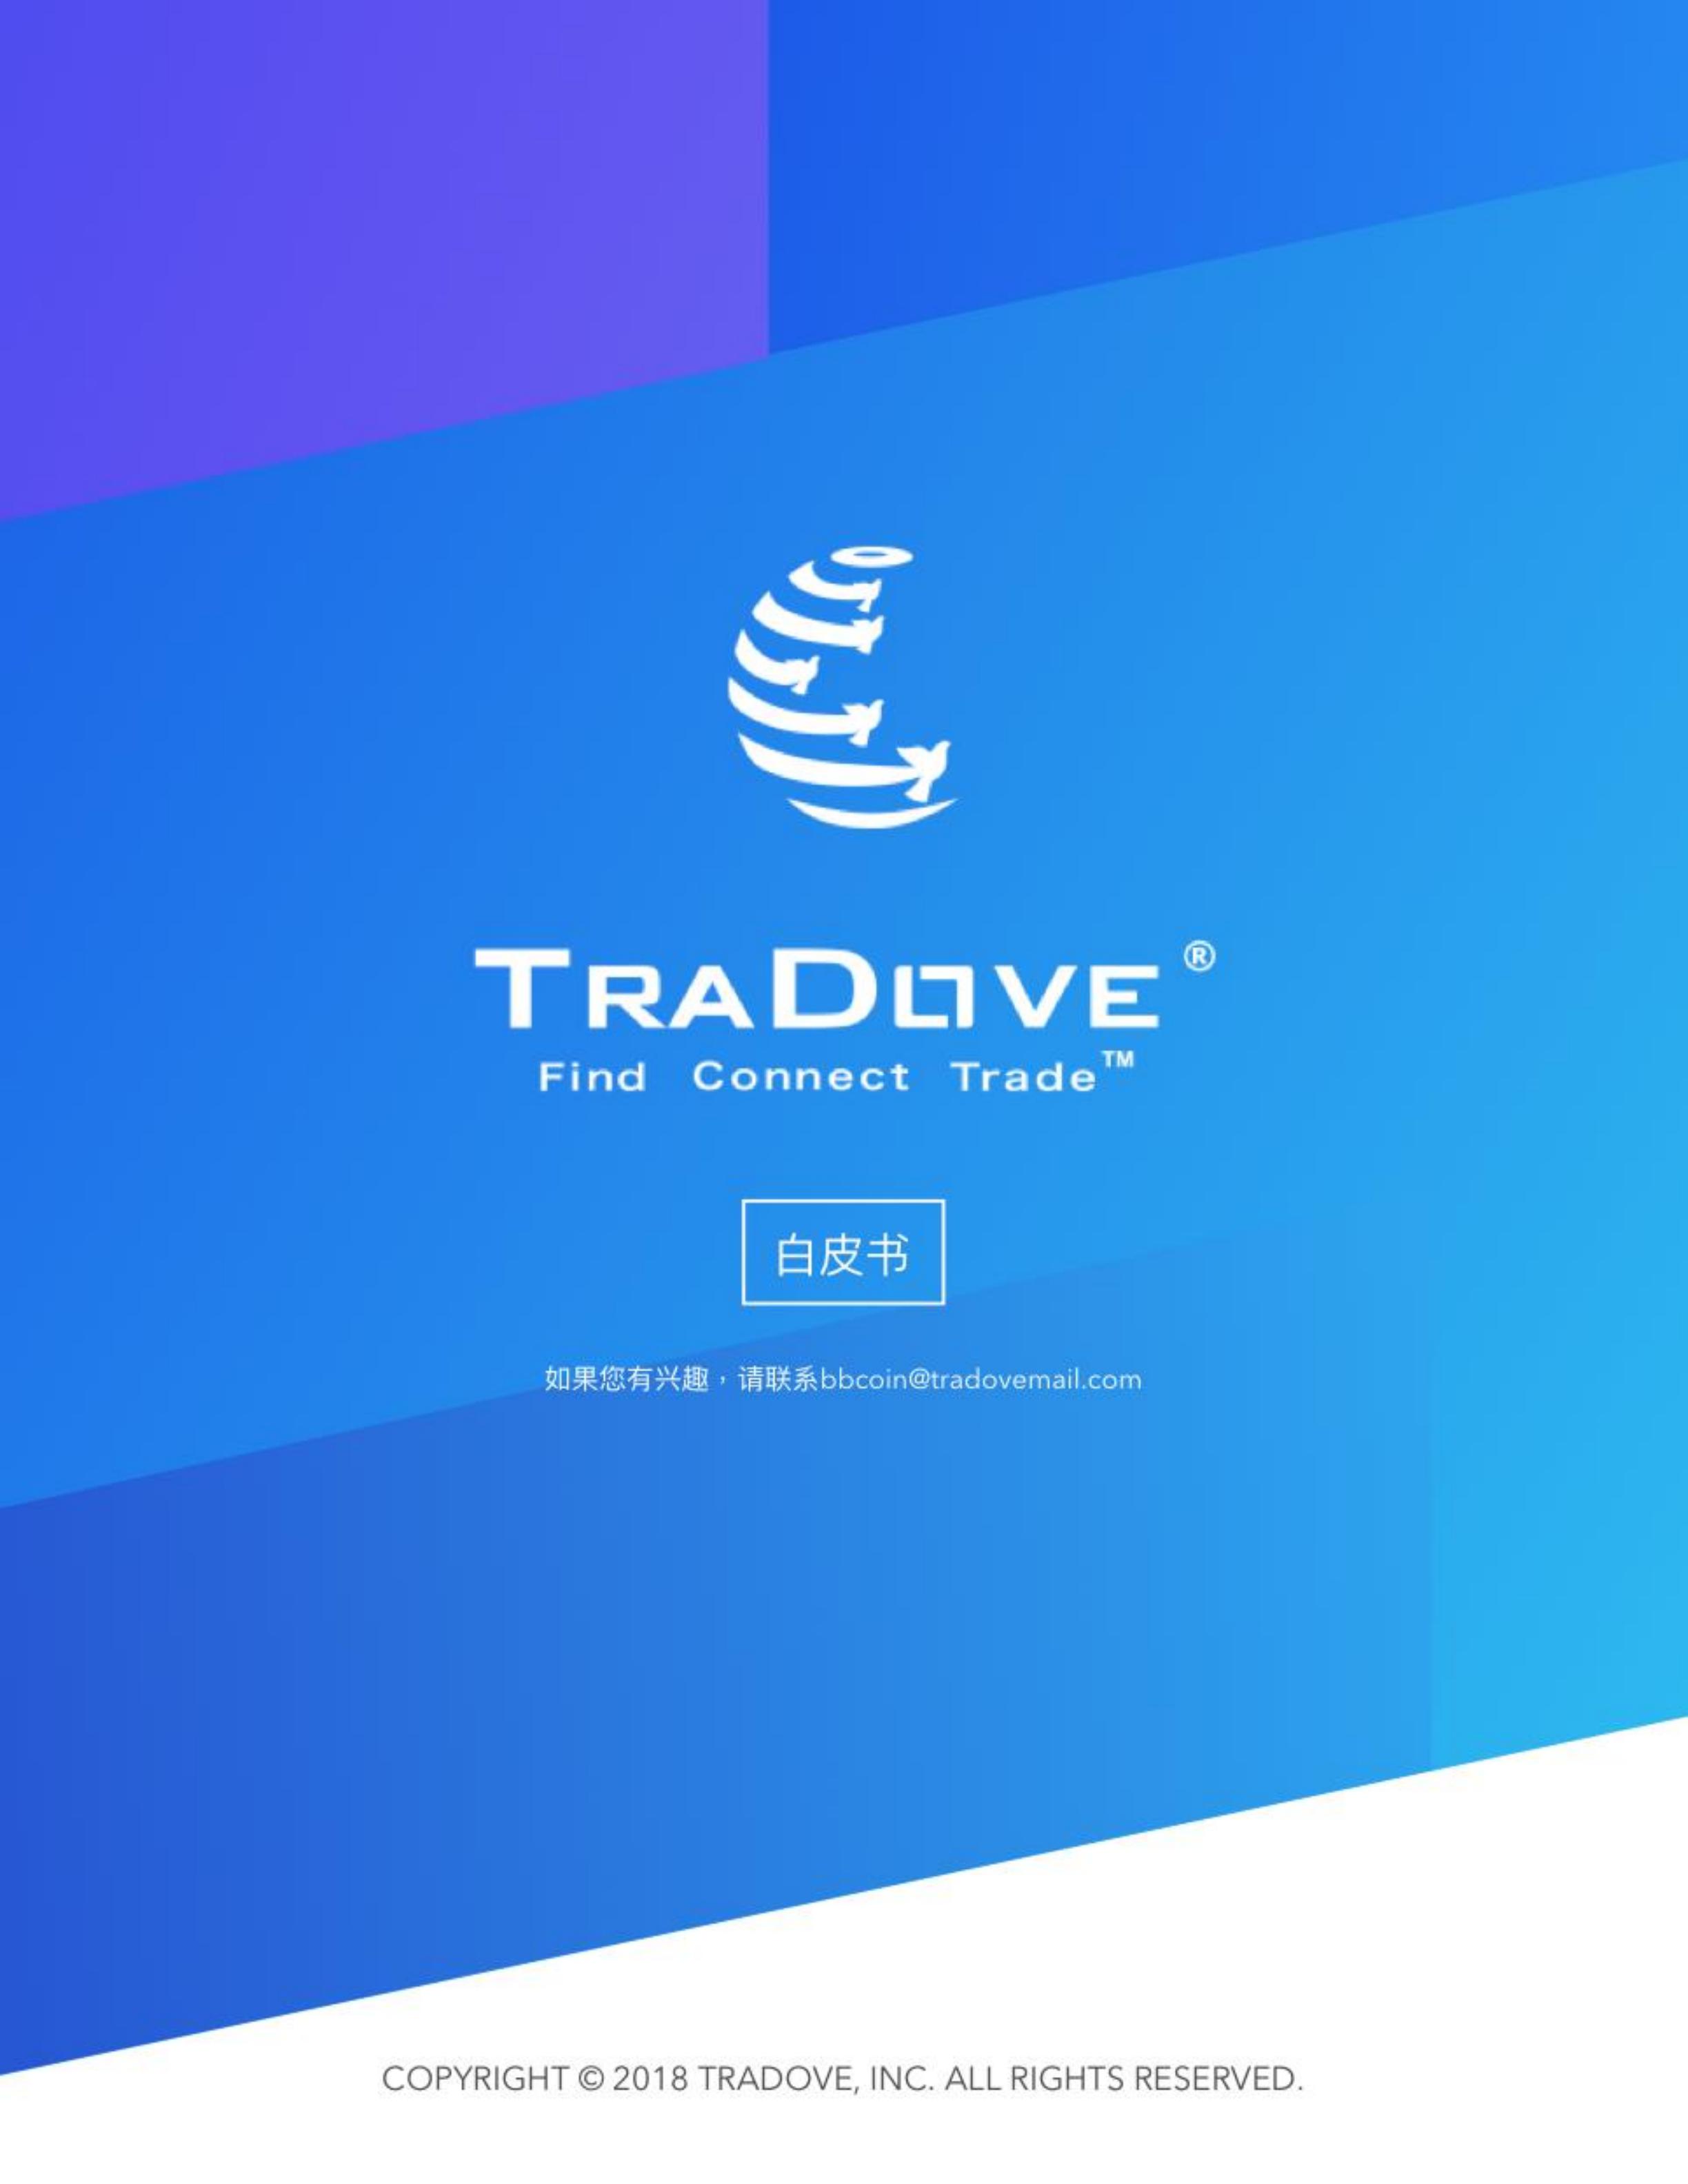 BBC_TraDove Global B2B Token Offering White Paper - Simplified Chinese V0.3.2_00.jpg